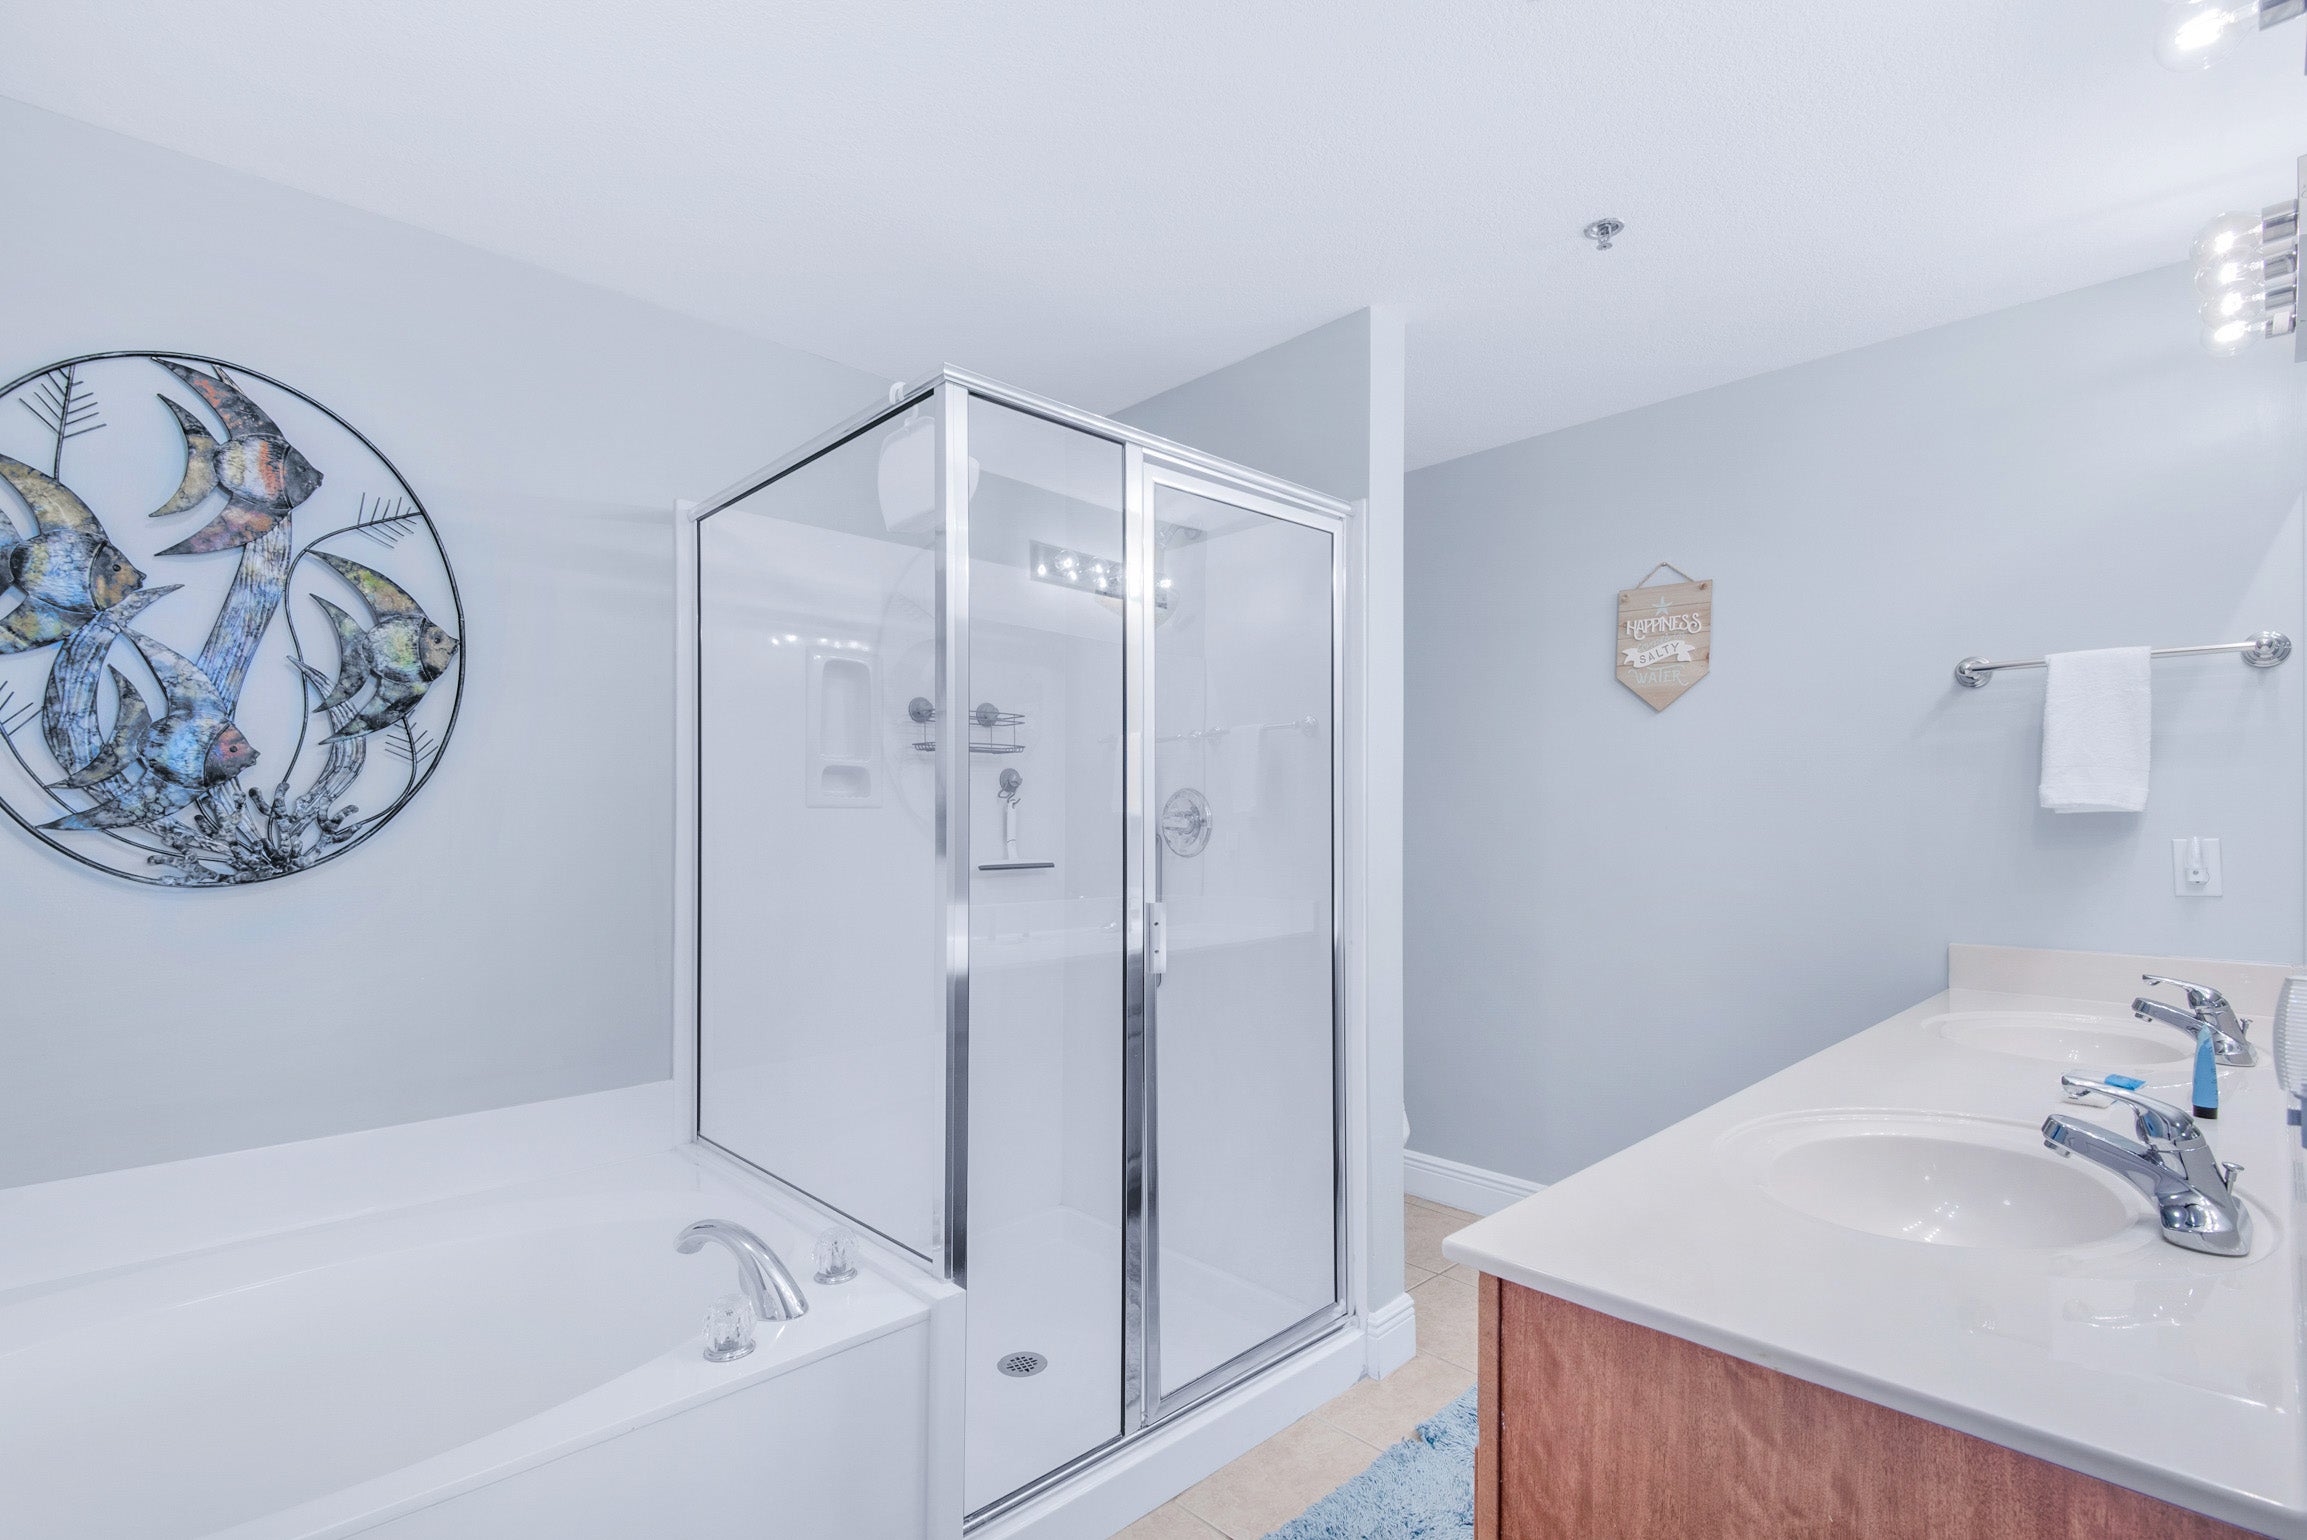 Soaking tub and walk-in shower